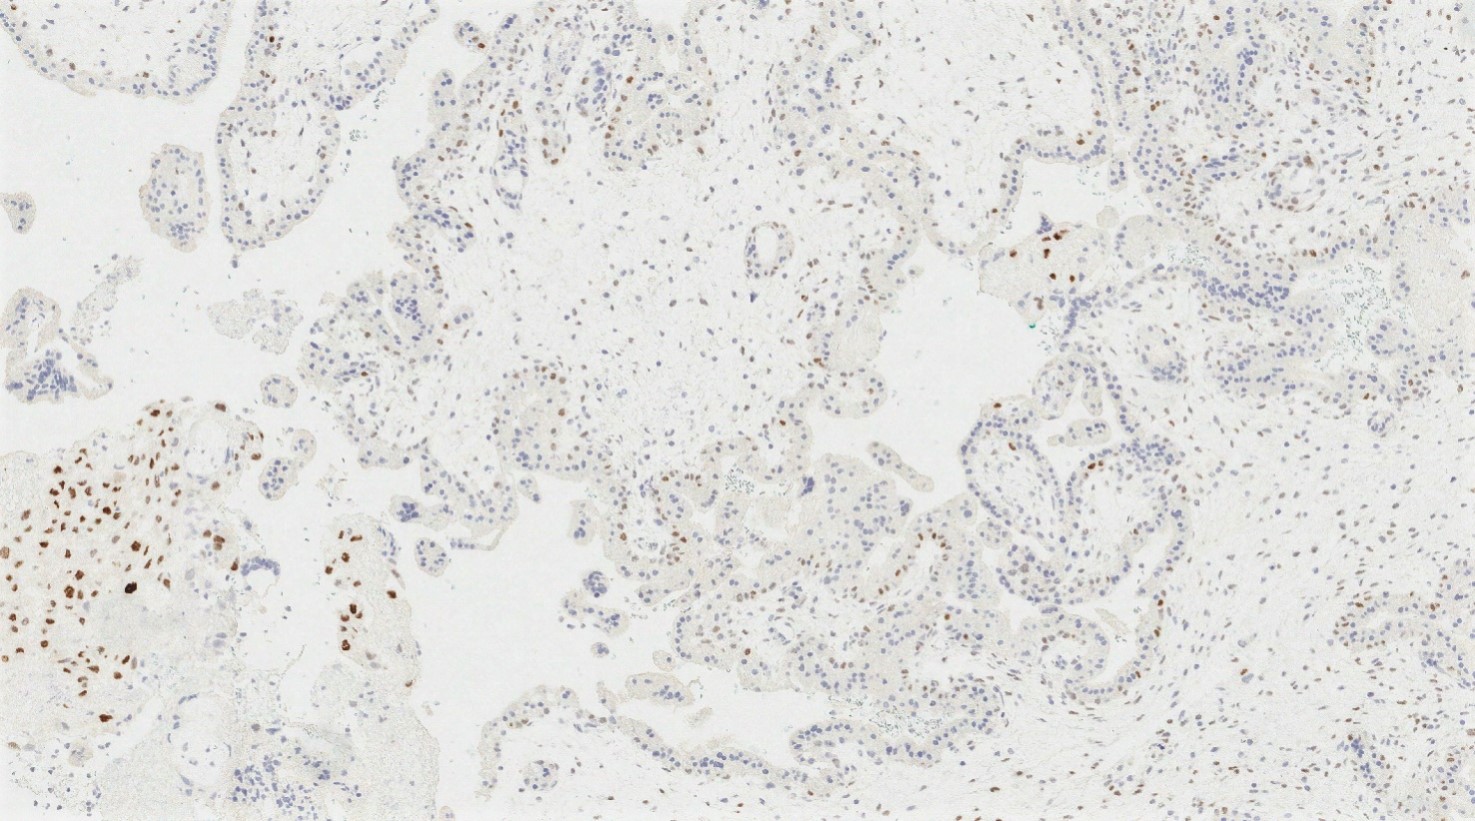 p57 nuclear staining